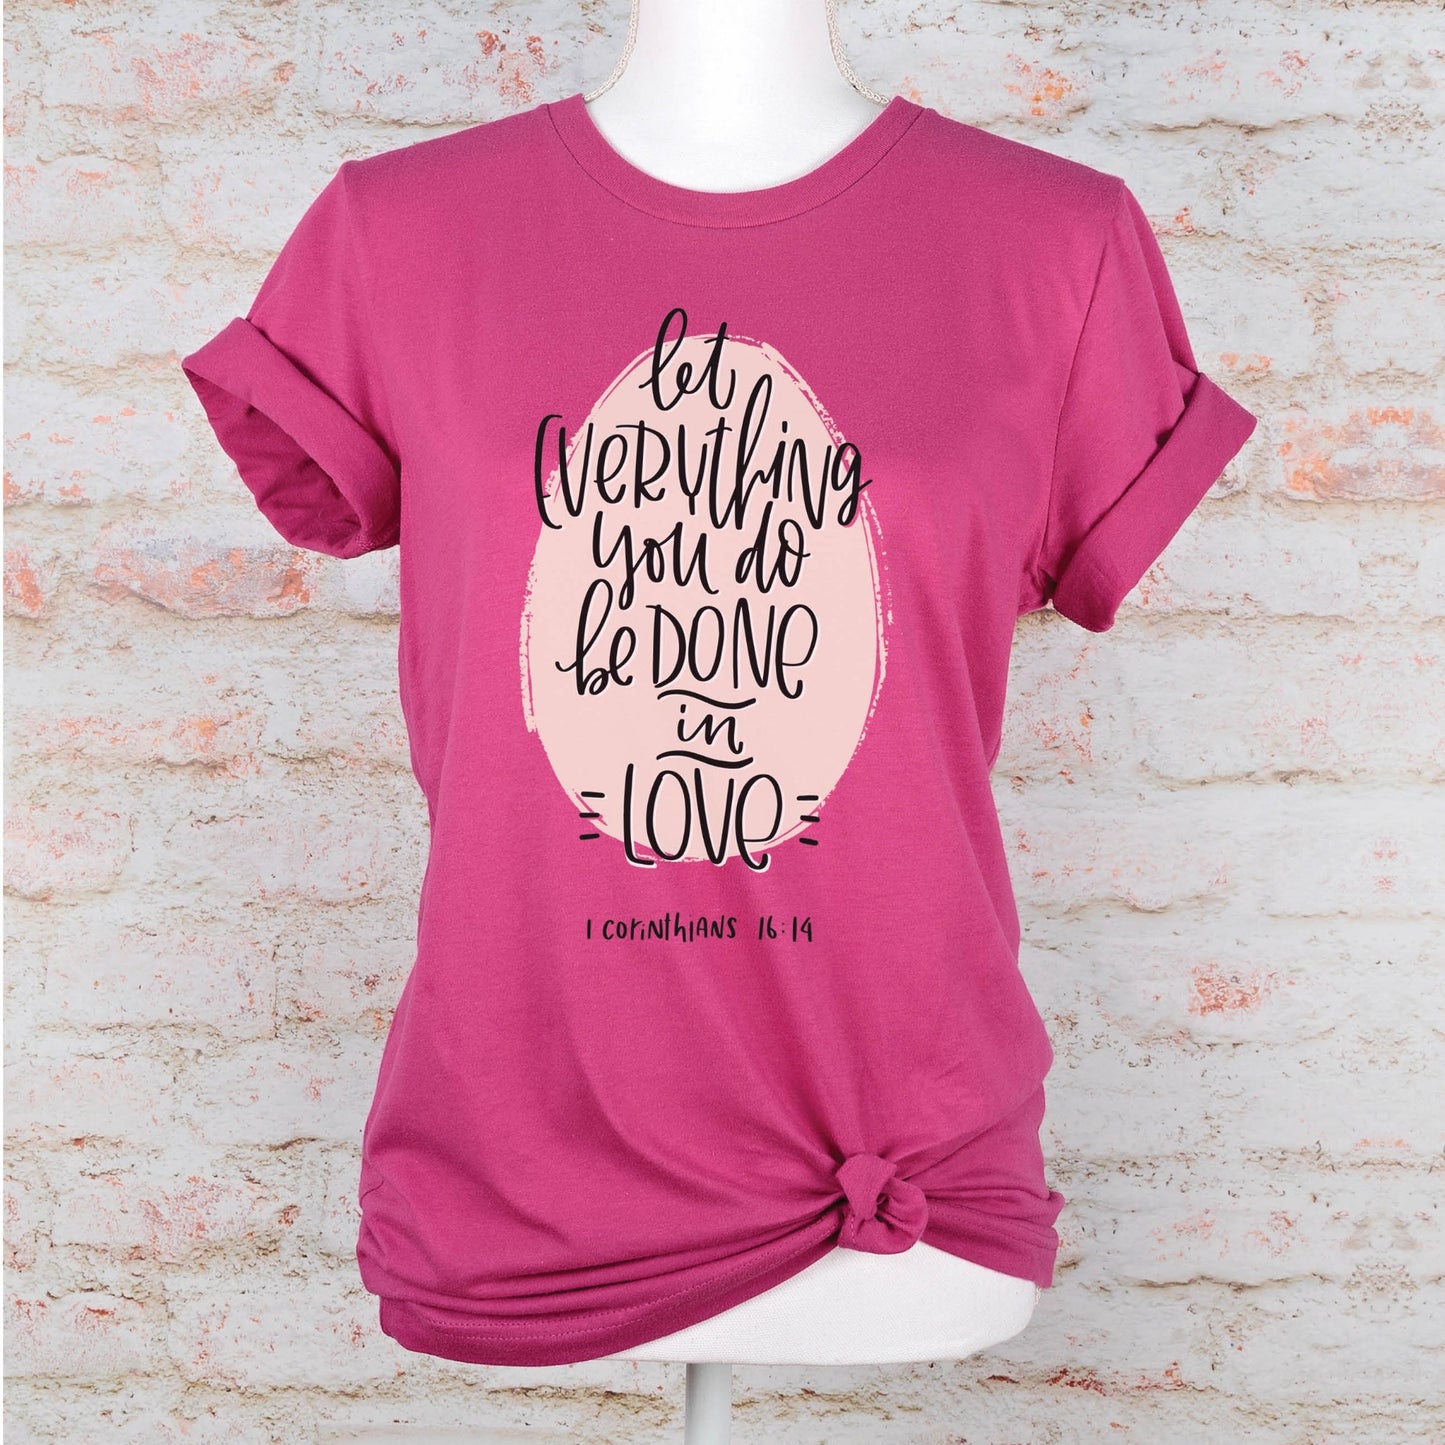 Soft quality berry hot pink t-shirt with 1 Corinthians 16:14 Let Everything You Do Be Done In Love bible verse printed in blush pink and black - Christian aesthetic unisex tee shirt design for women